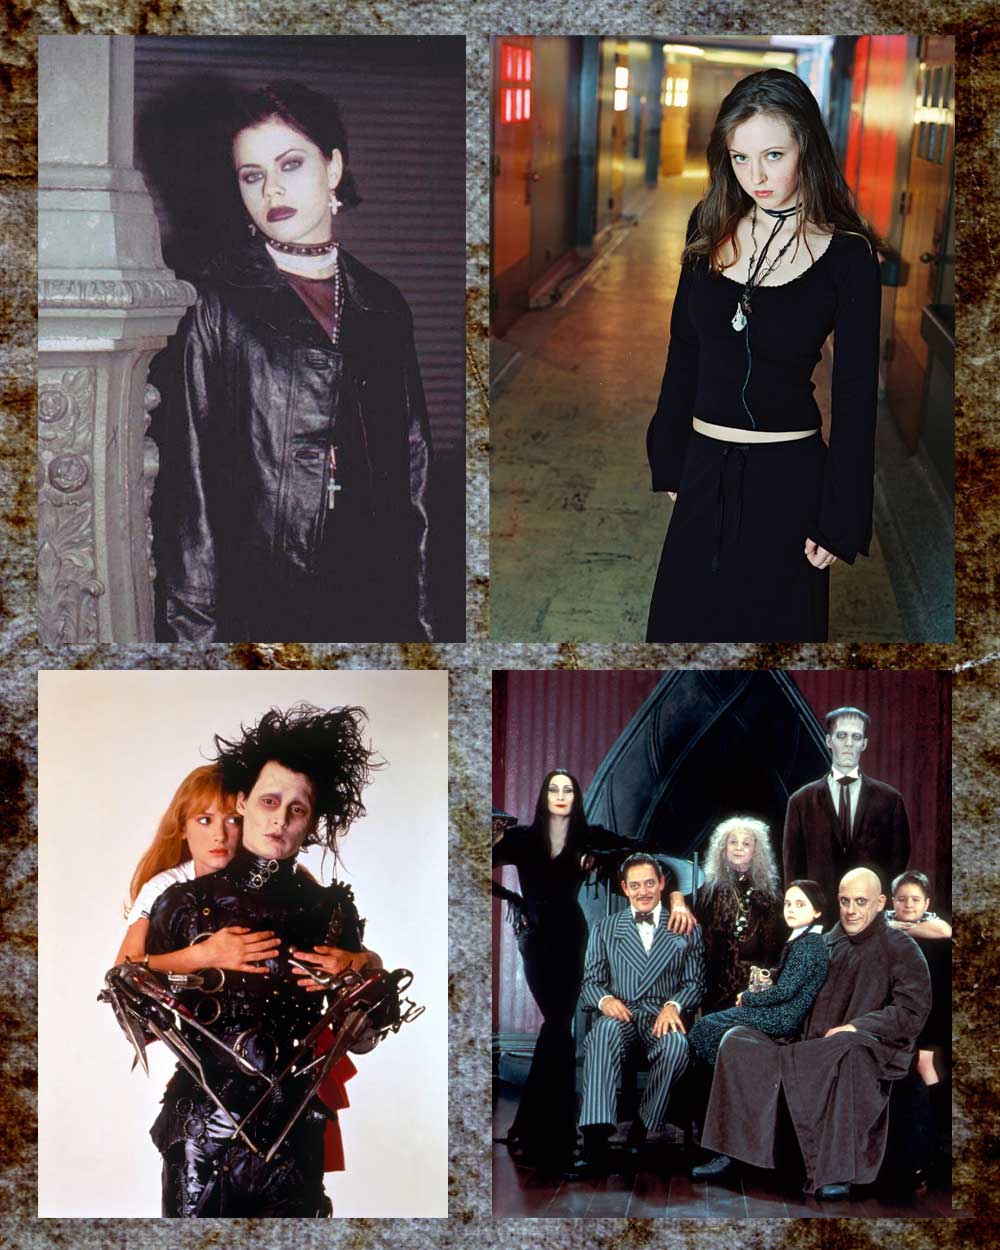 90s Goth fashion styles inspired by Gothic TV shows and Movies